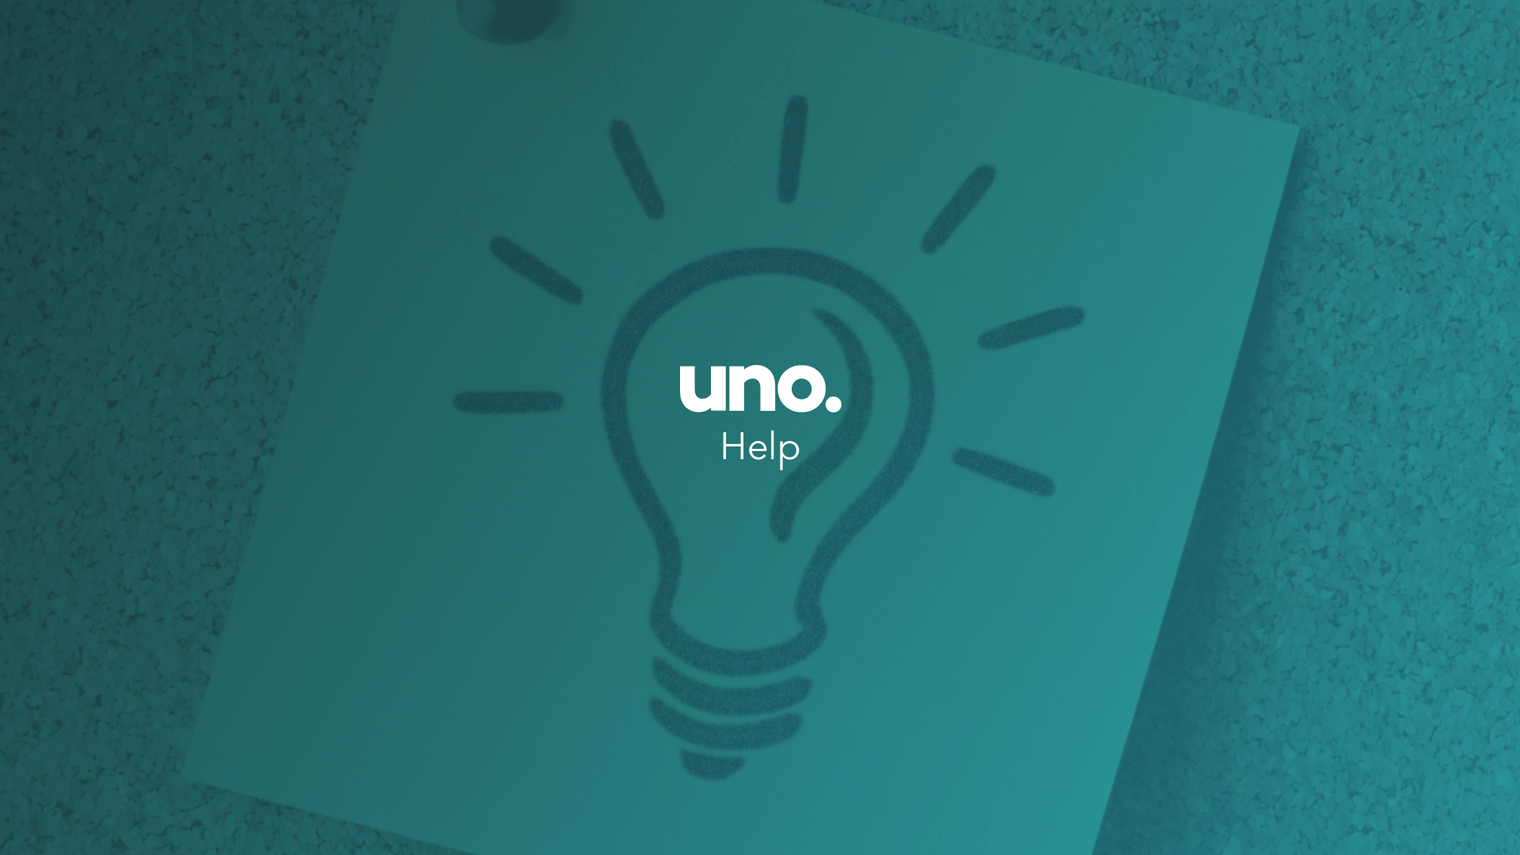 Will using uno affect my credit history?